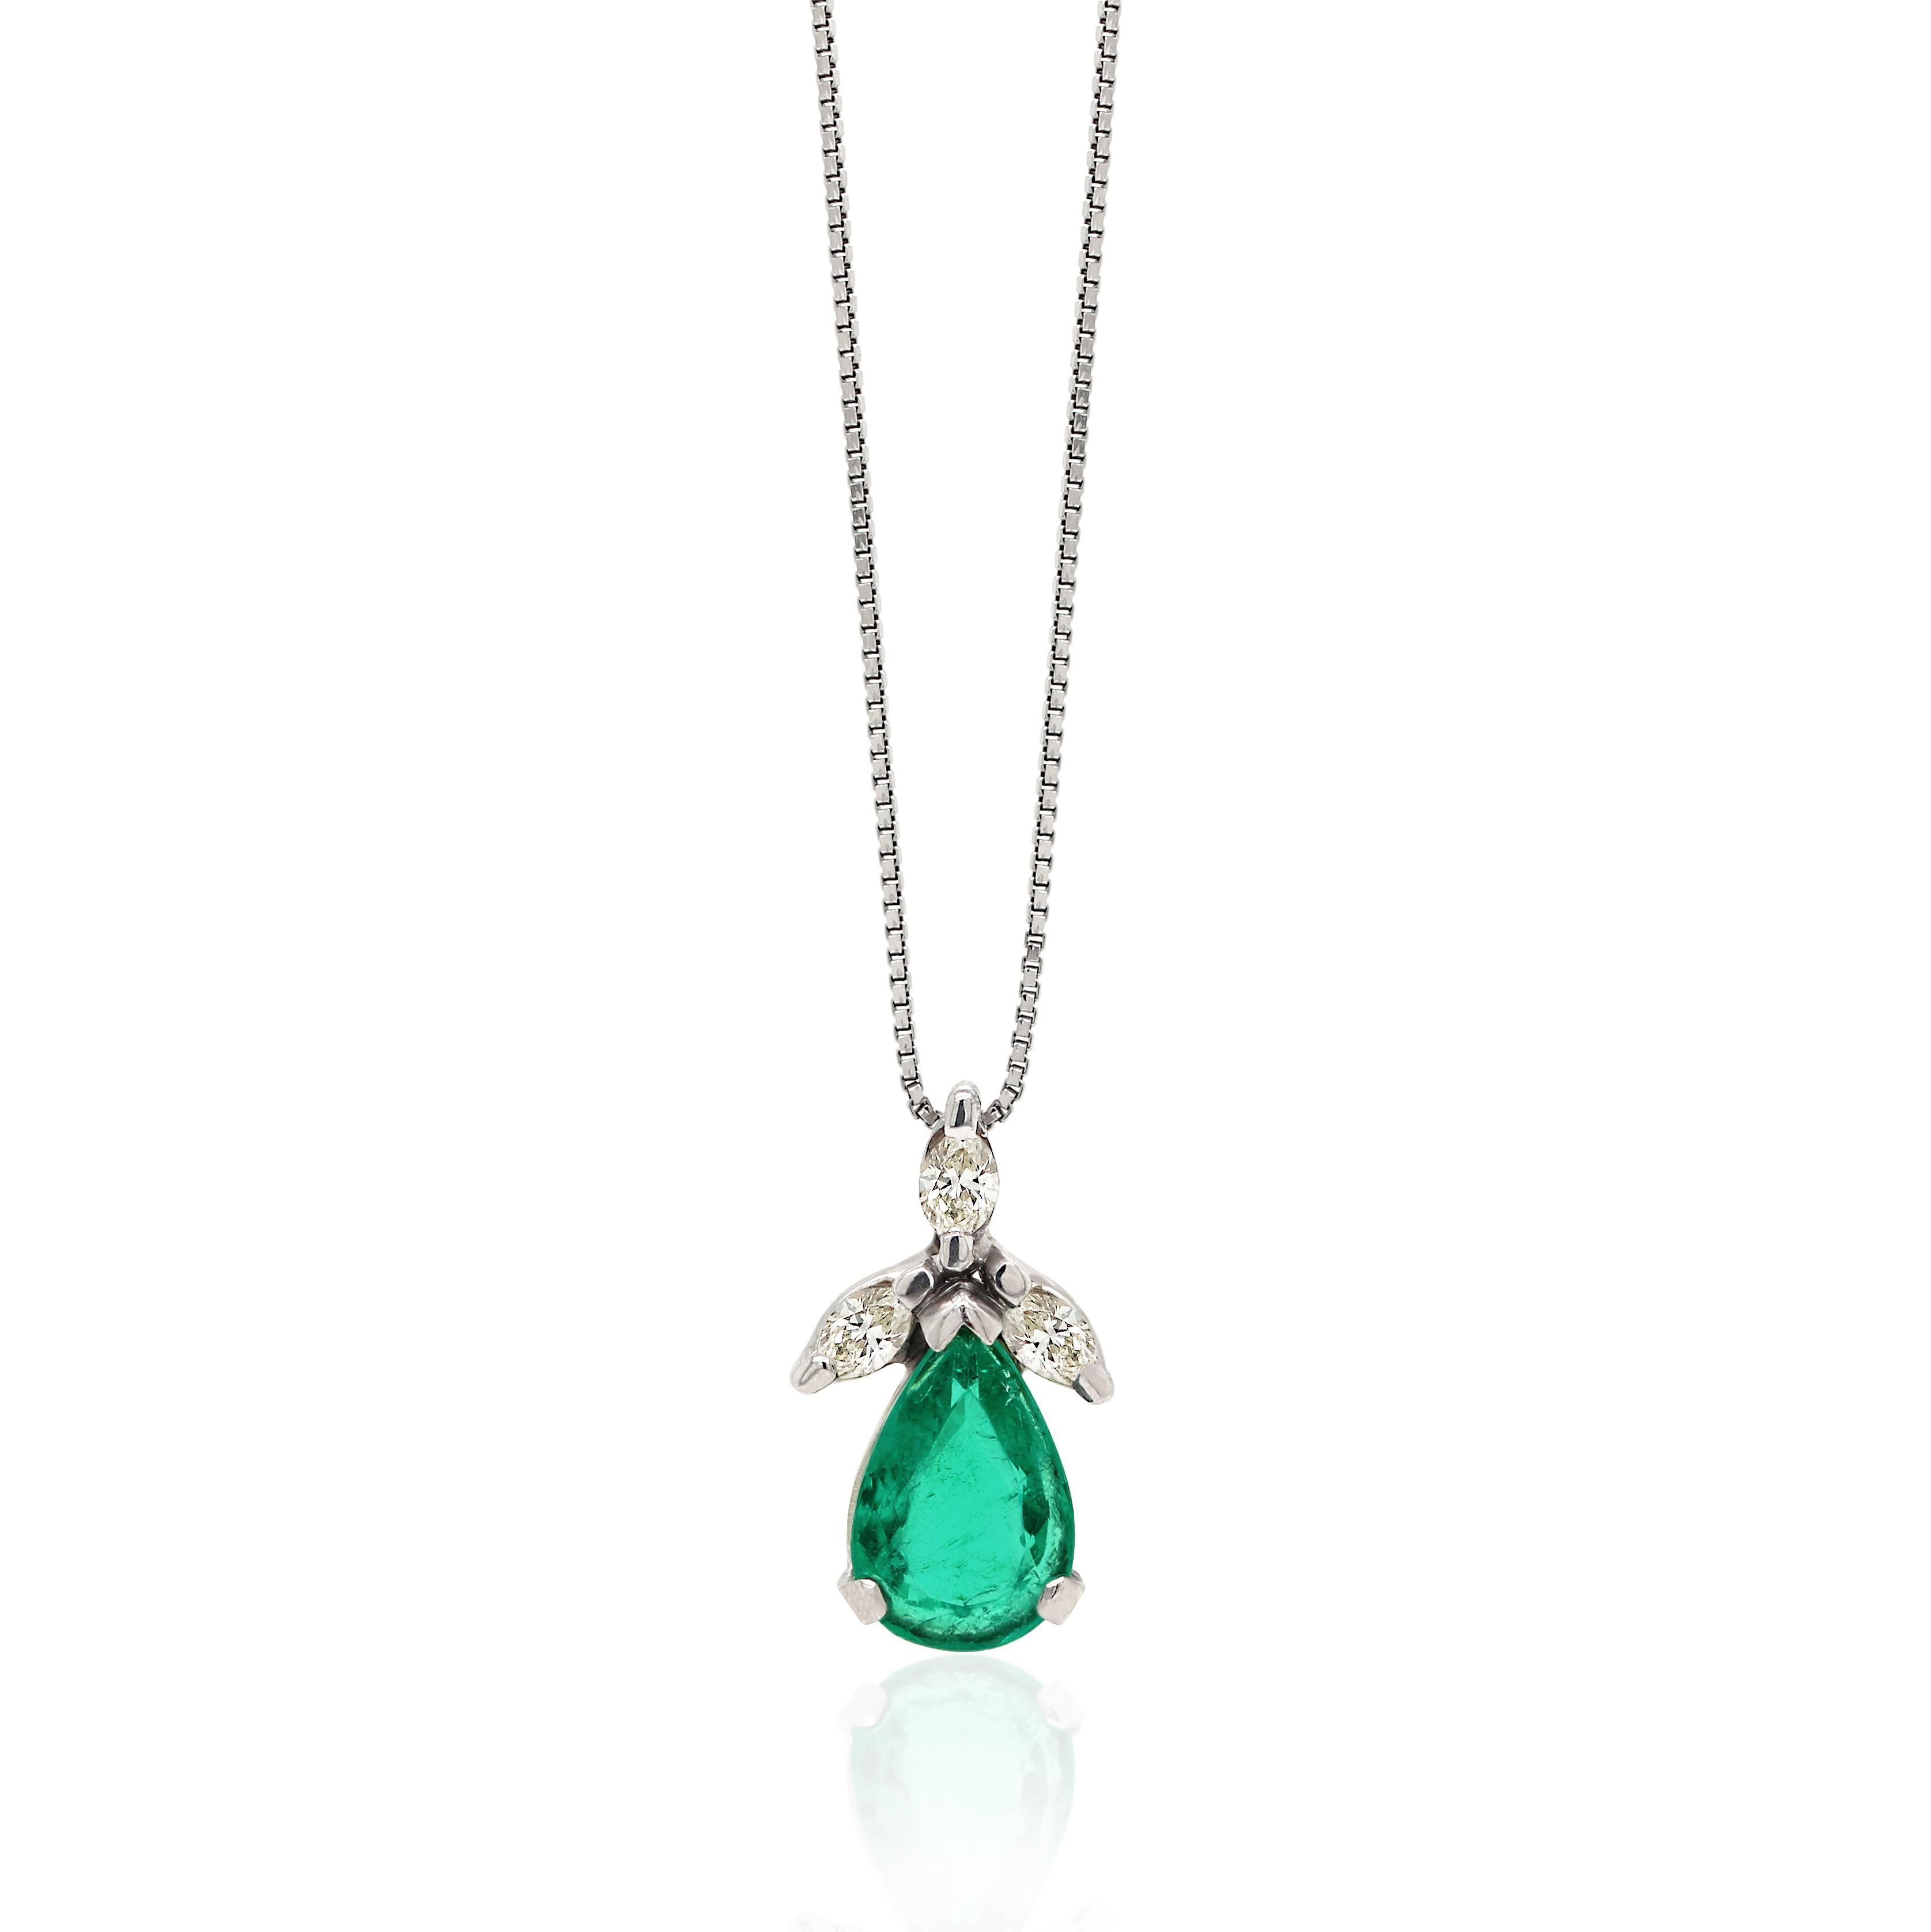 This pendant features a pear shape emerald weighing 3.60ct set in a three claw, open back mount. The beautiful emerald is accompanied by 3 marquise shape diamonds above the stone weighing a total combined weight of 0.50ct in open back, claw settings